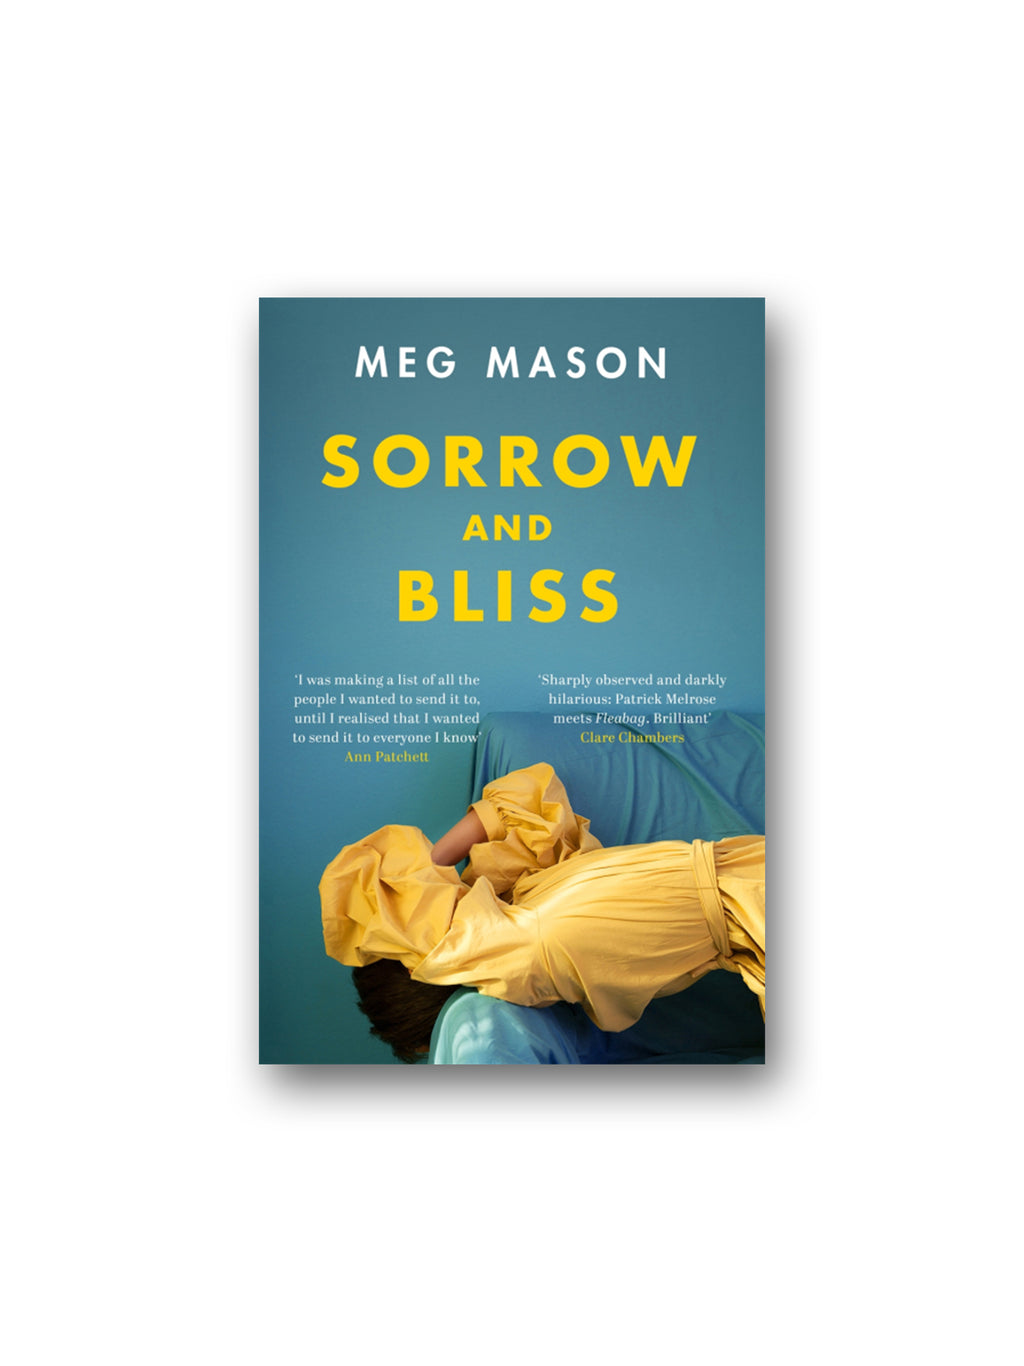 Sorrow and Bliss : One of the Sunday Times Style 'Hottest New Holiday Reads'